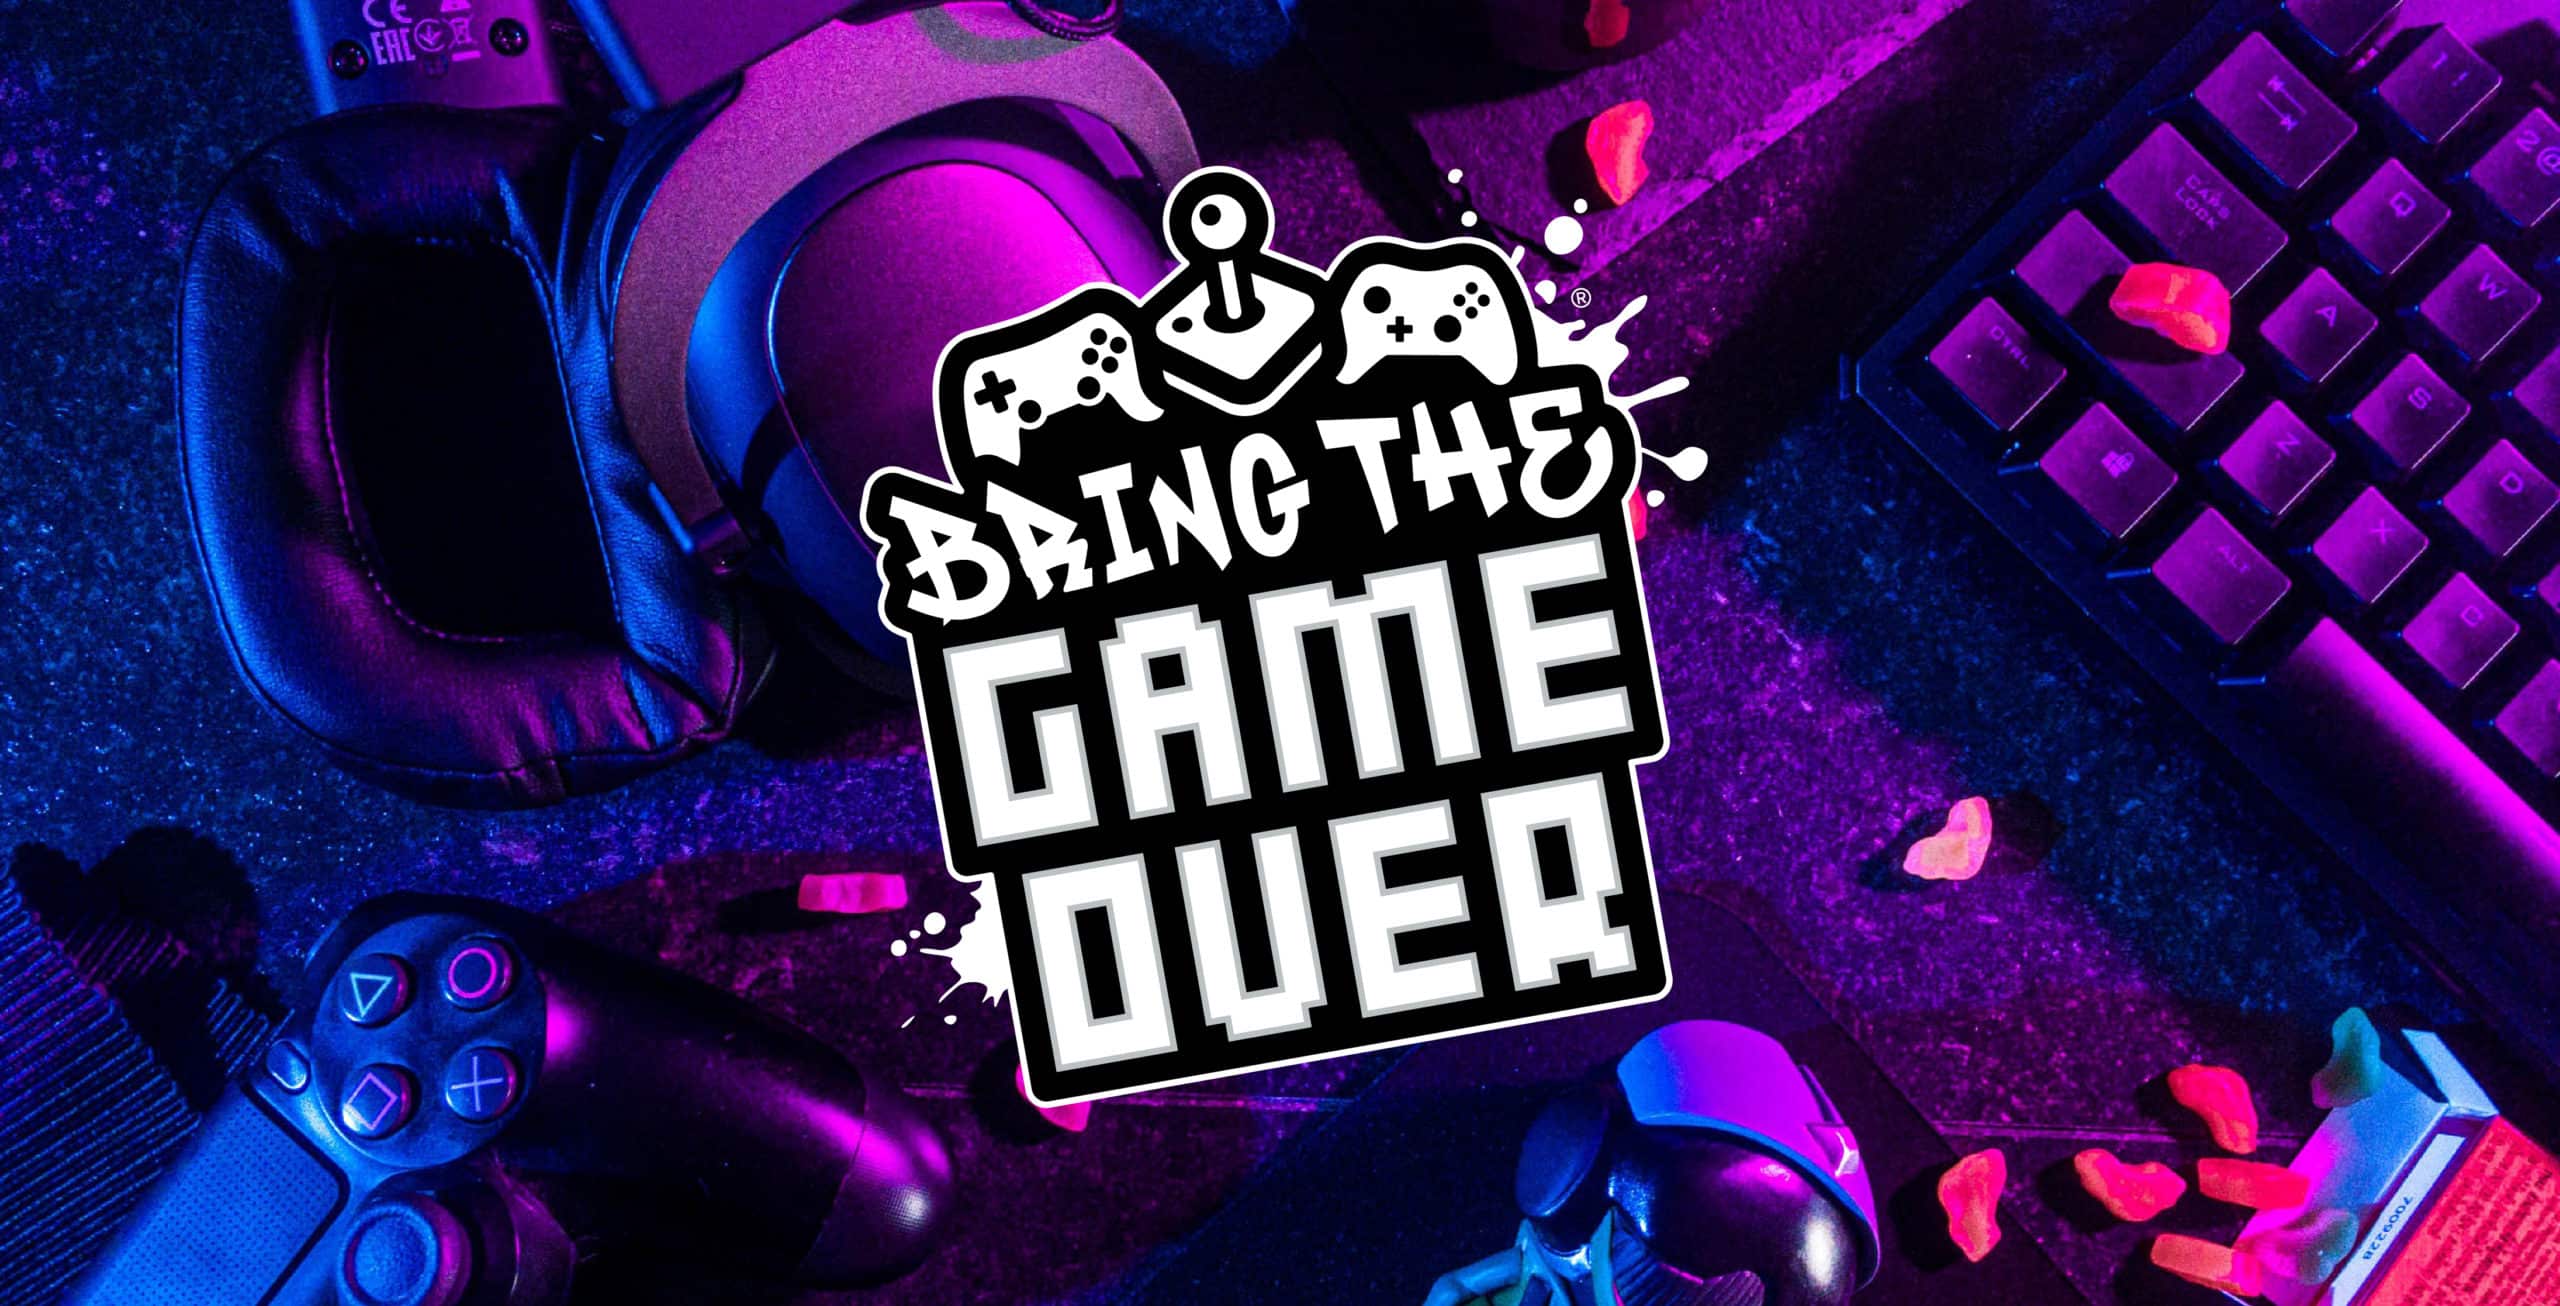 Bring the game over logo